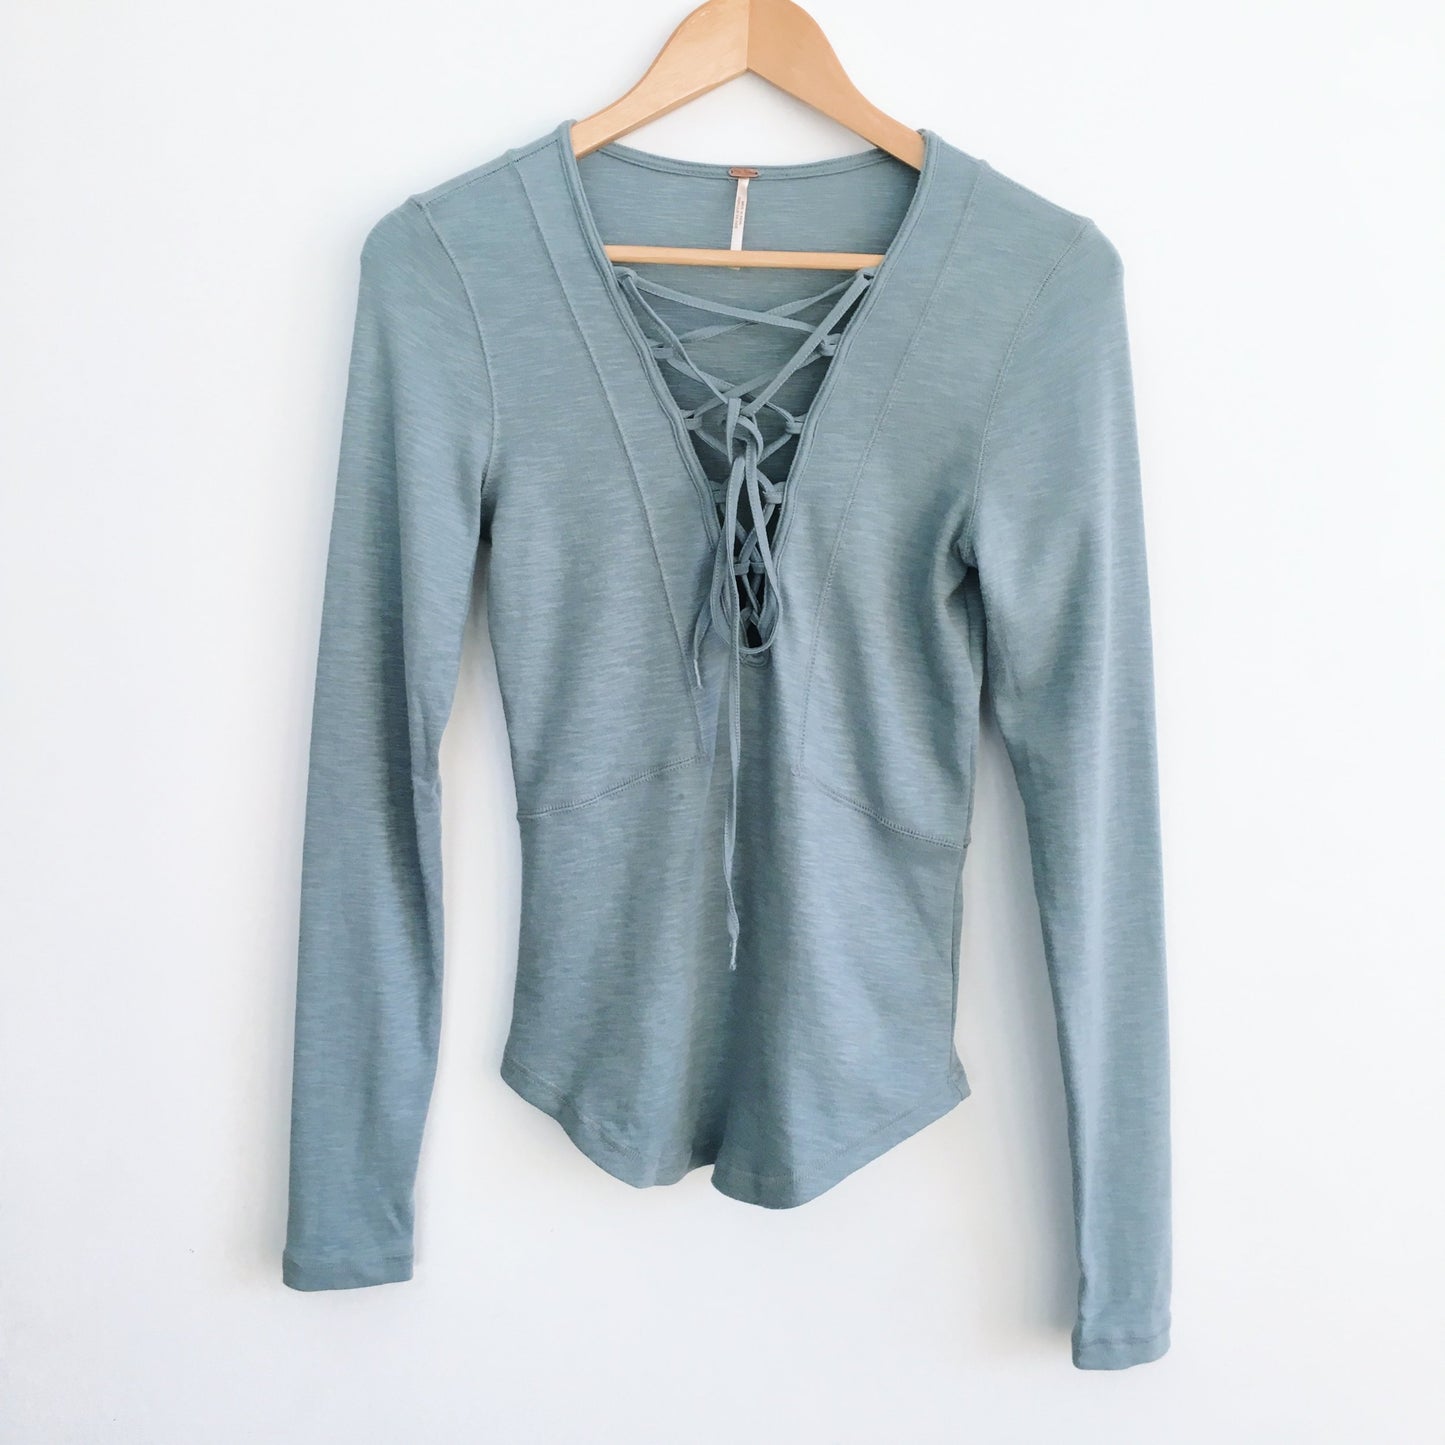 Free People Blue Lace Up Long Sleeve - Size Small